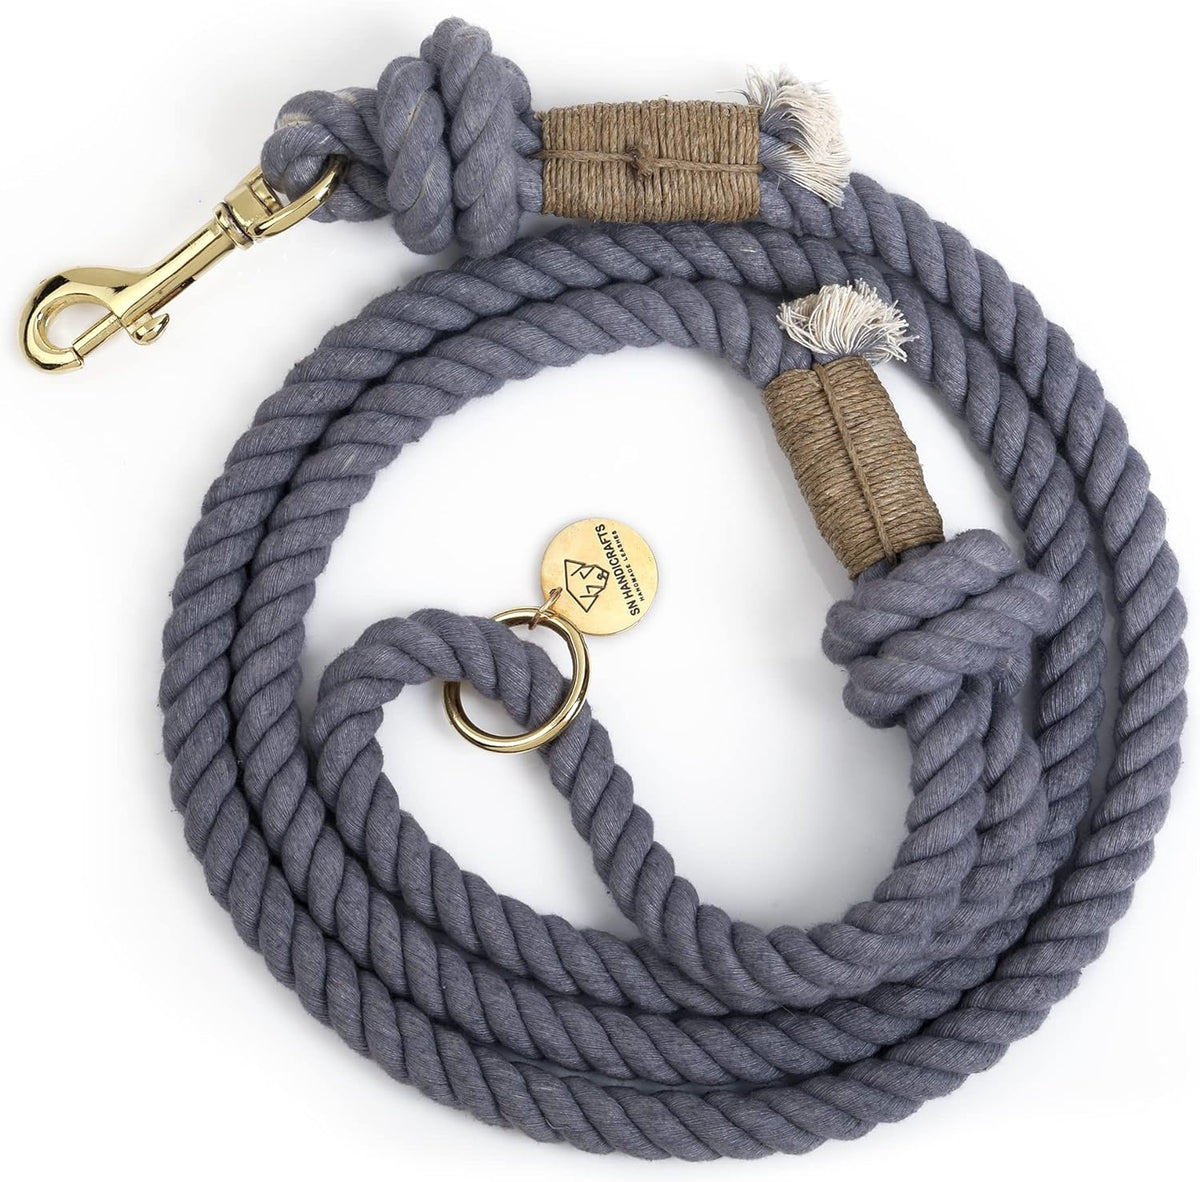 Grey Handmade Rope Leashes for Dogs Rope Dog Leash